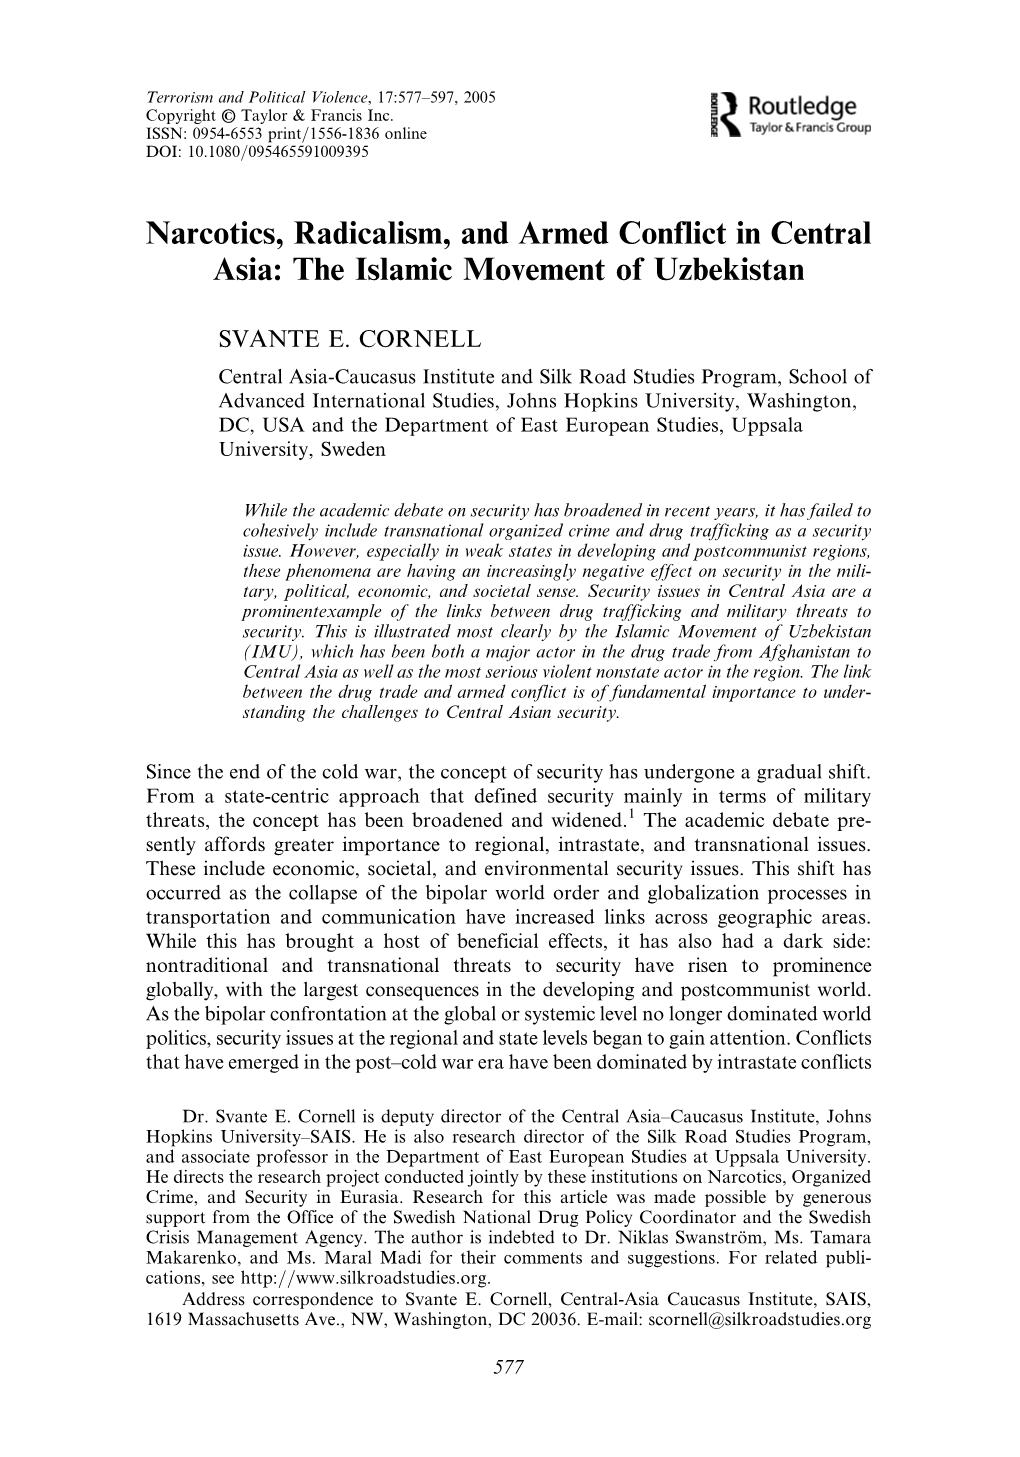 Narcotics, Radicalism, and Armed Conflict in Central Asia: the Islamic Movement of Uzbekistan